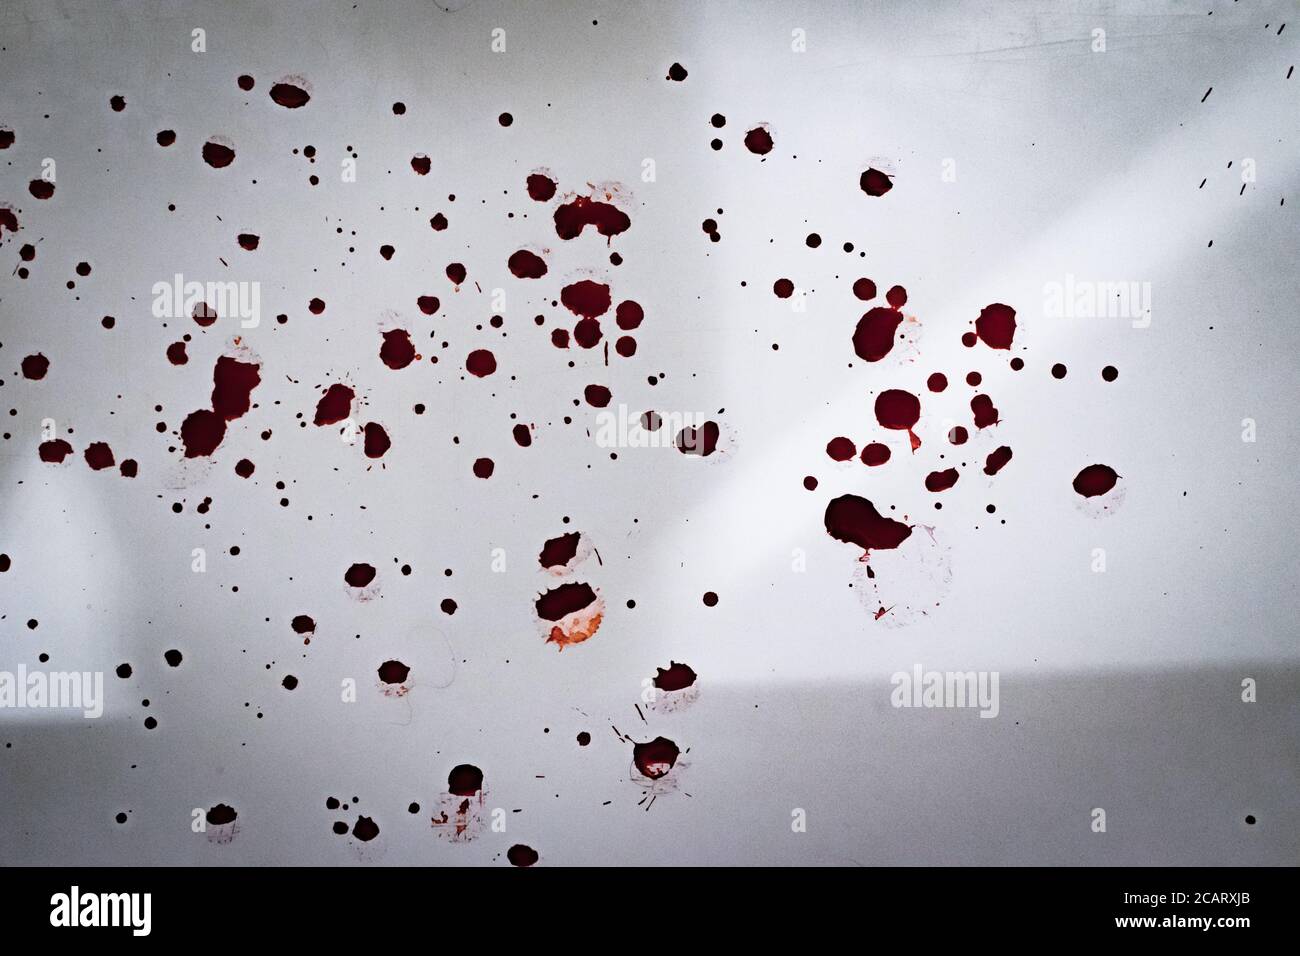 red blood drops on a white background coloring splattered depression self harm texture Stock Photo